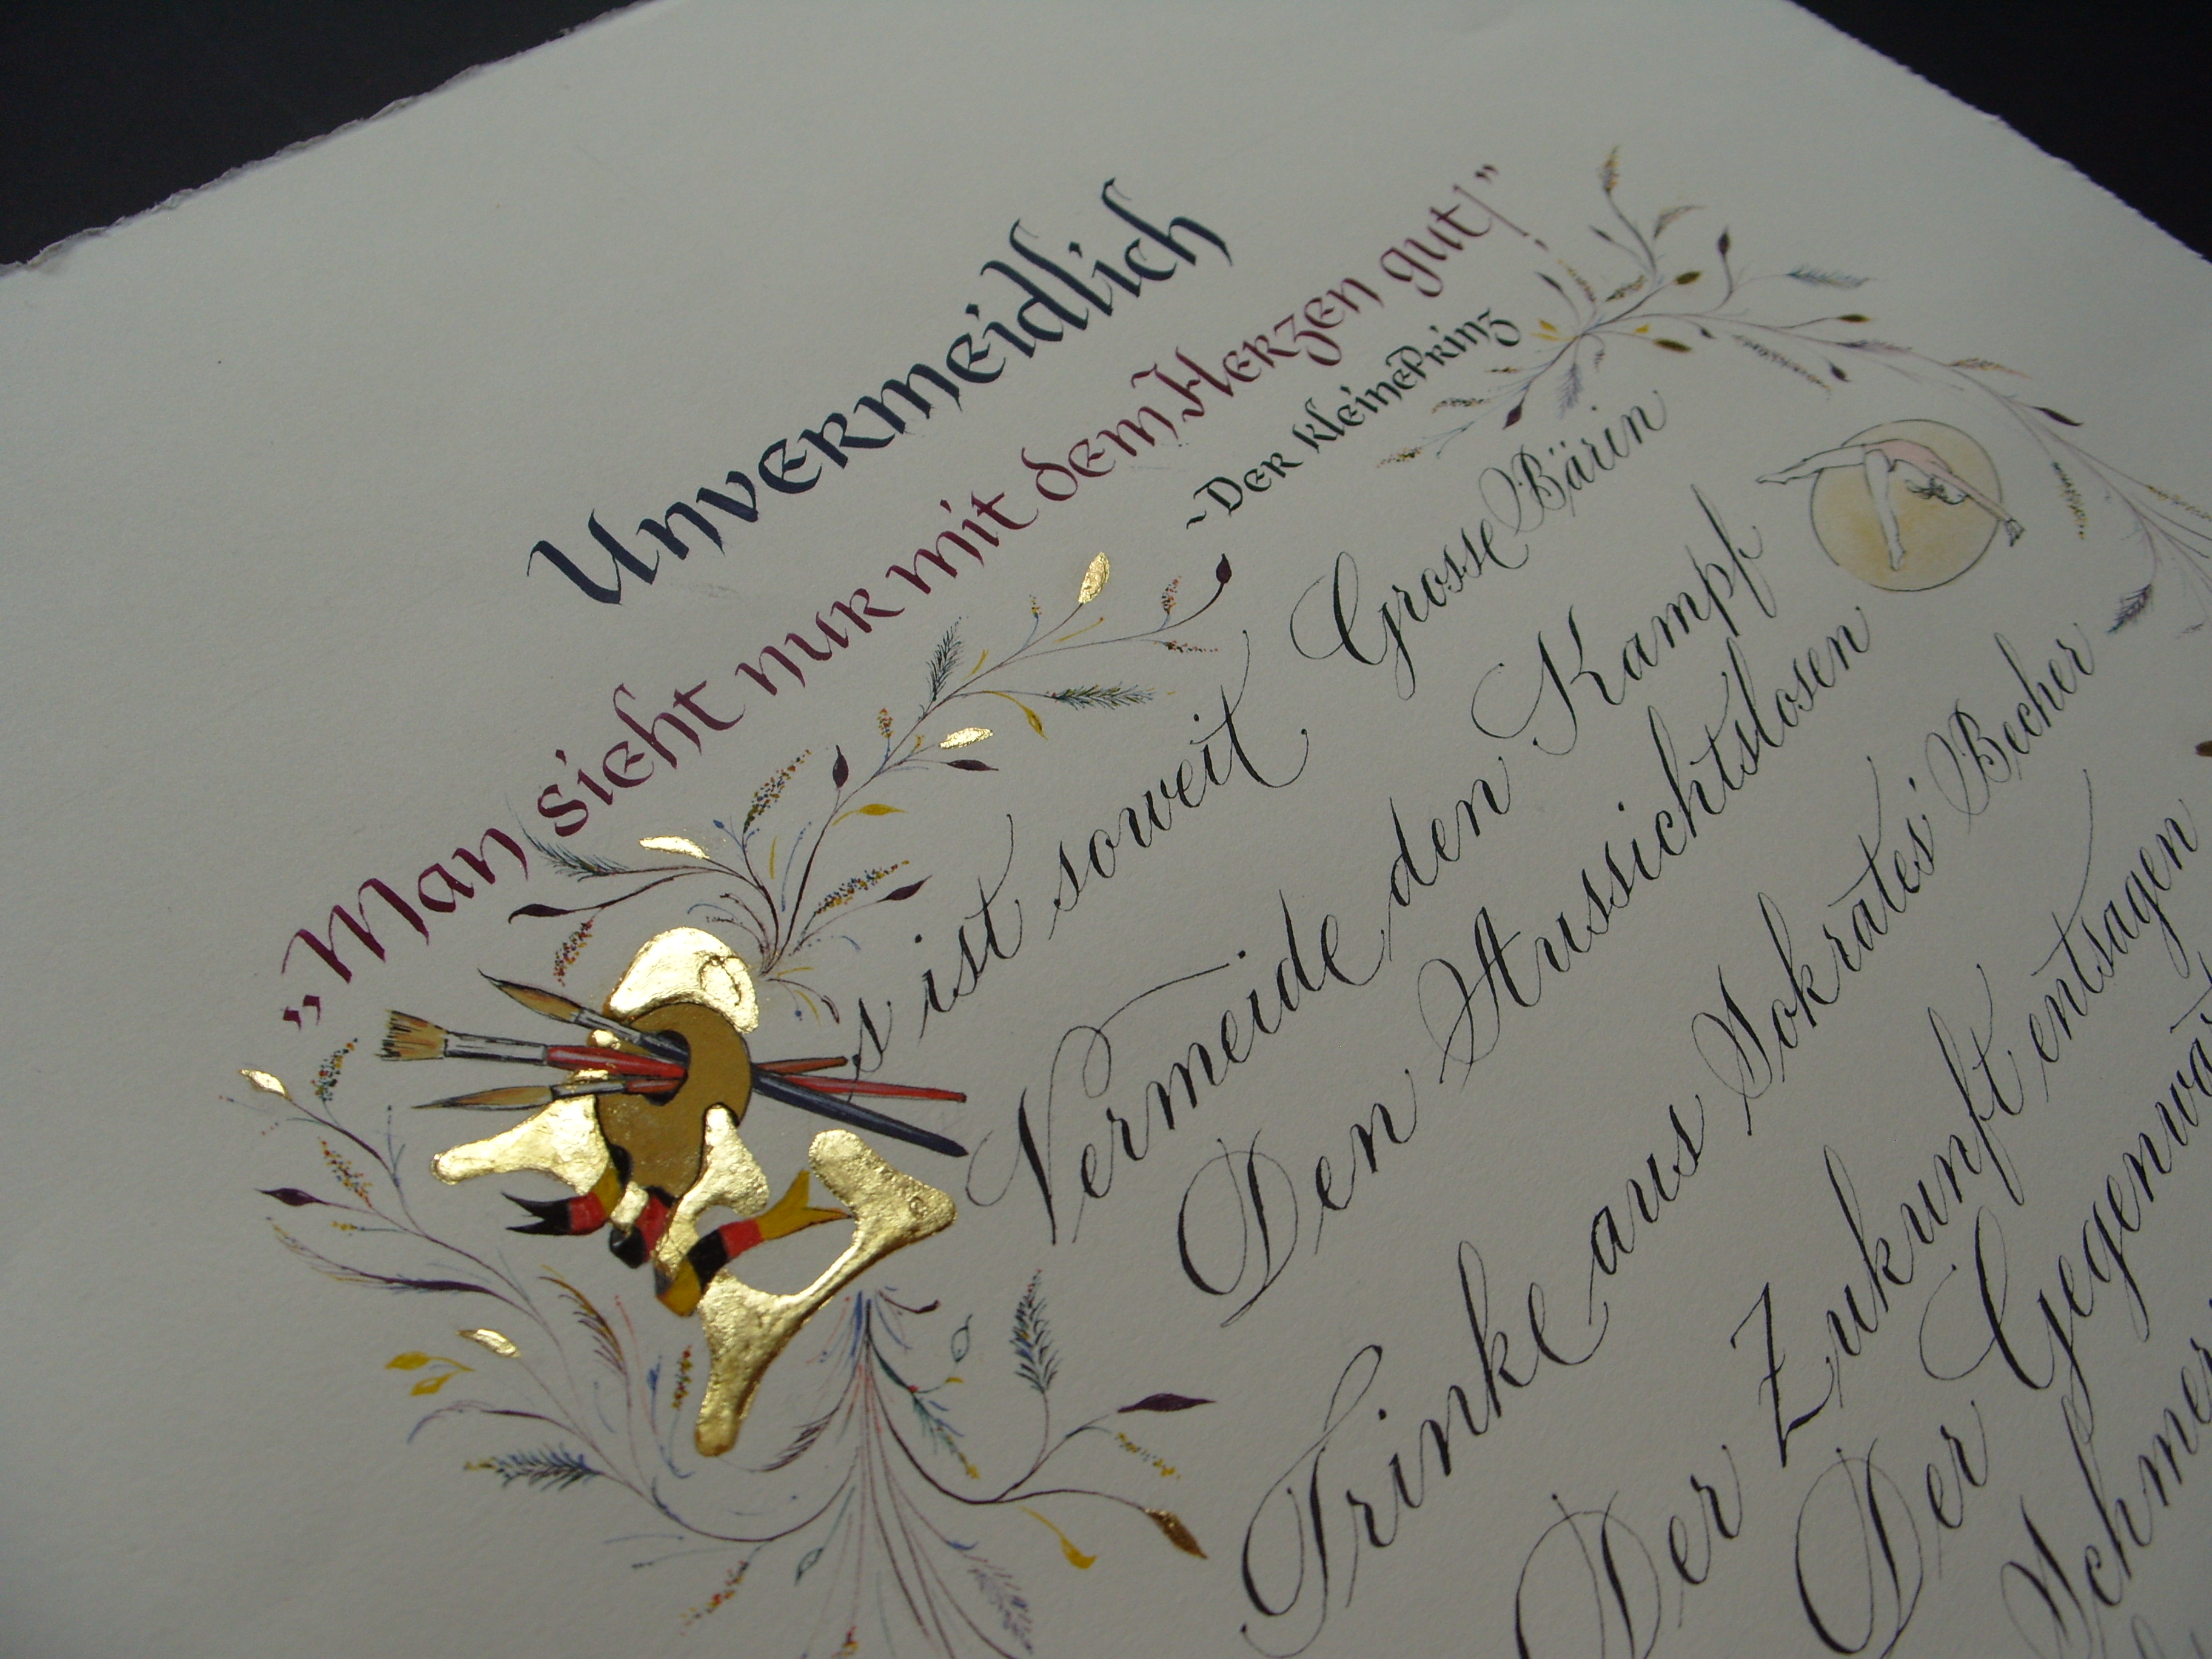 Poem, scribed and illuminated using 24 carat gold leaf and iron gall and gouache inks